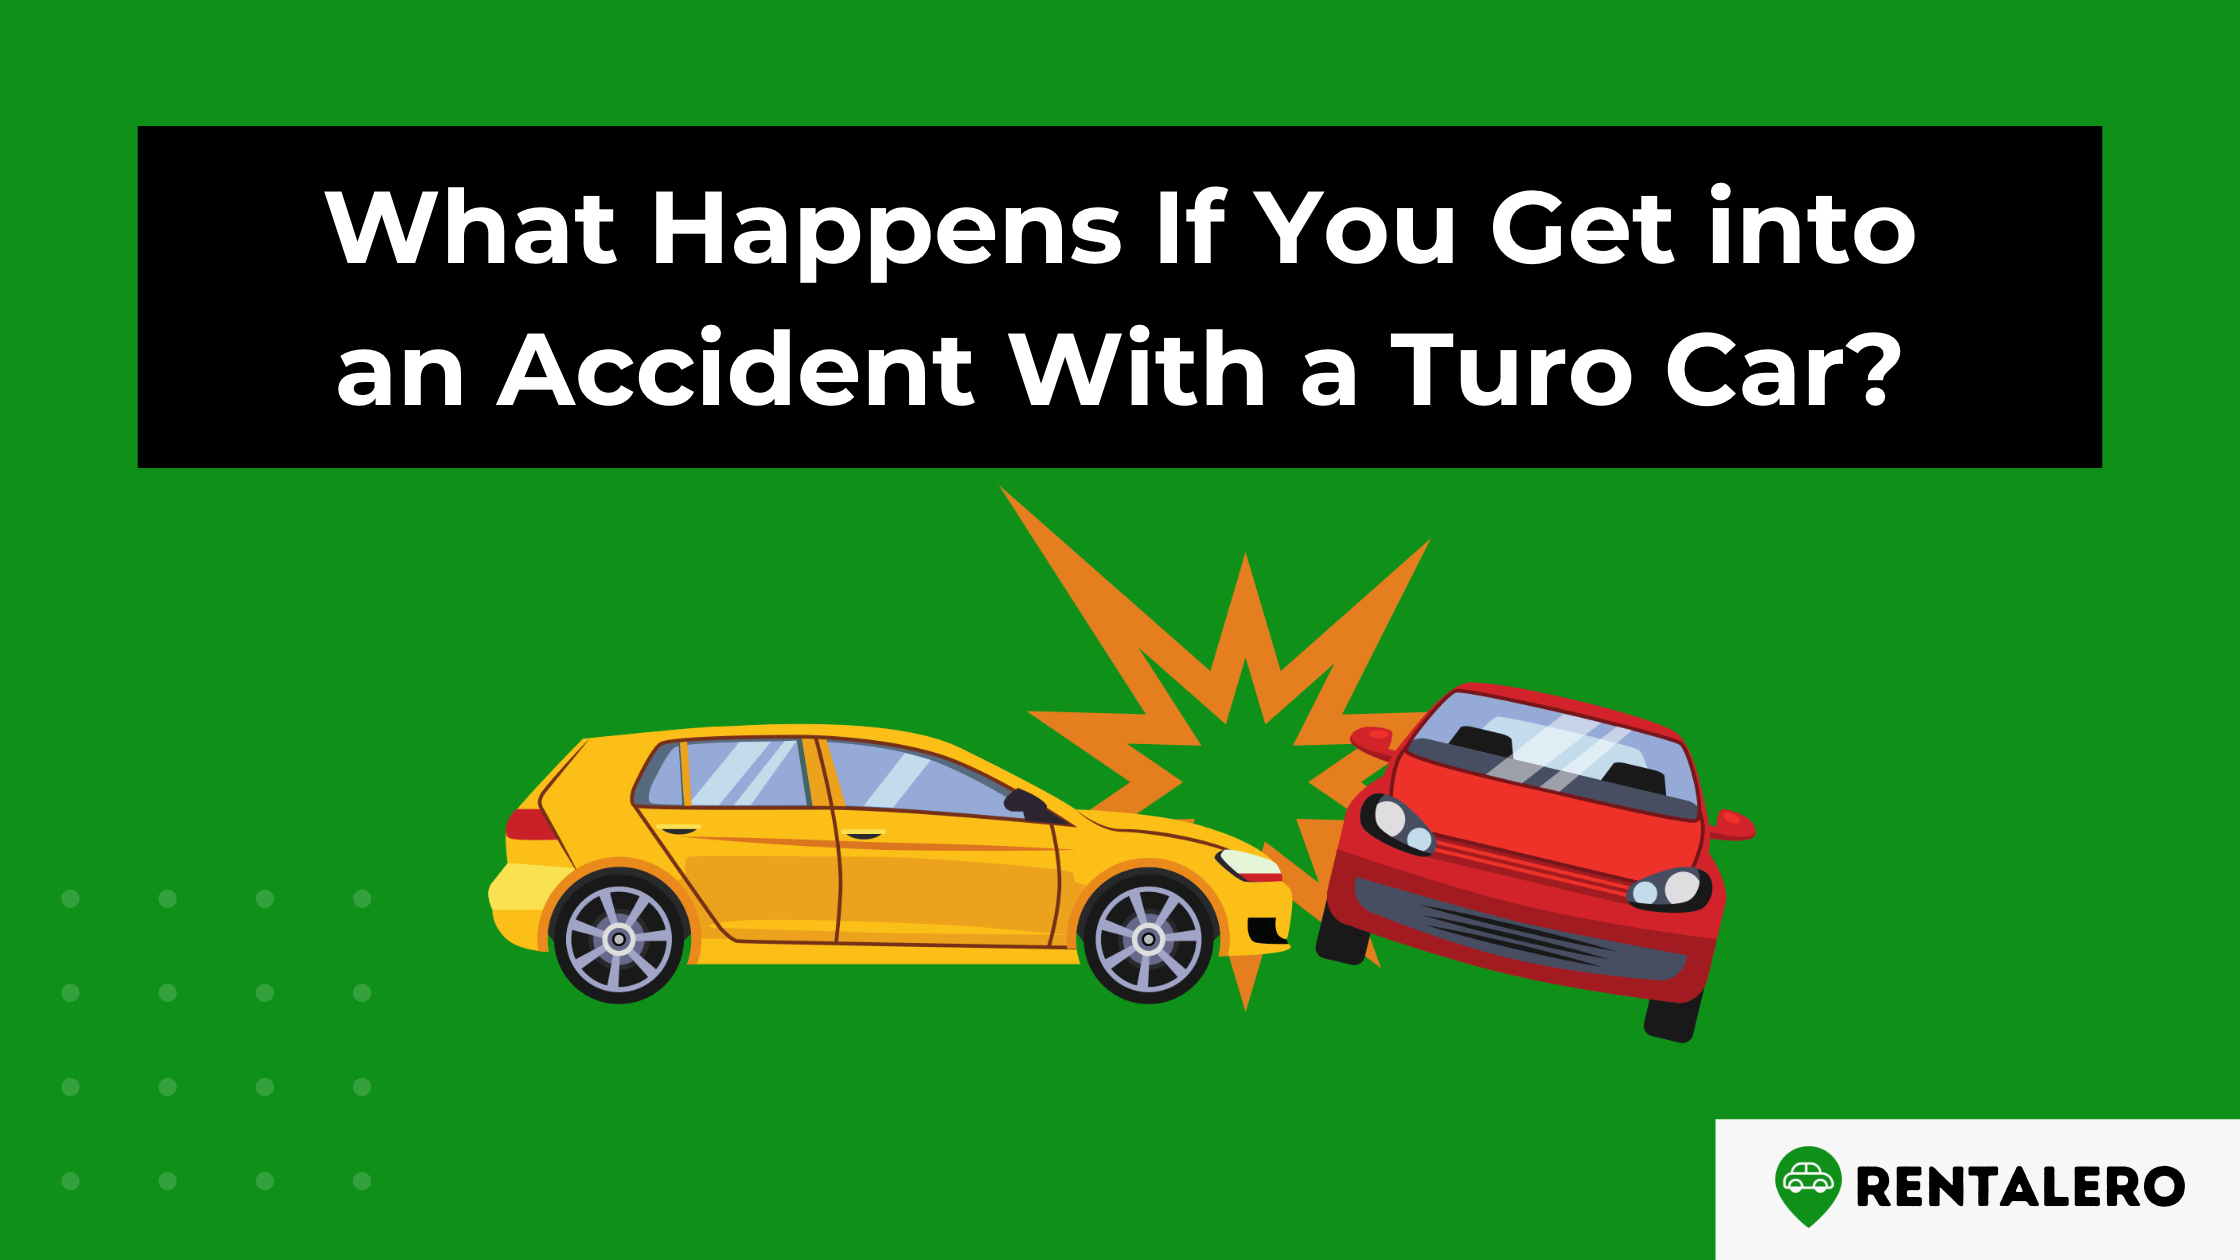 What Happens If You Get into an Accident With a Turo Car? What you need to know!